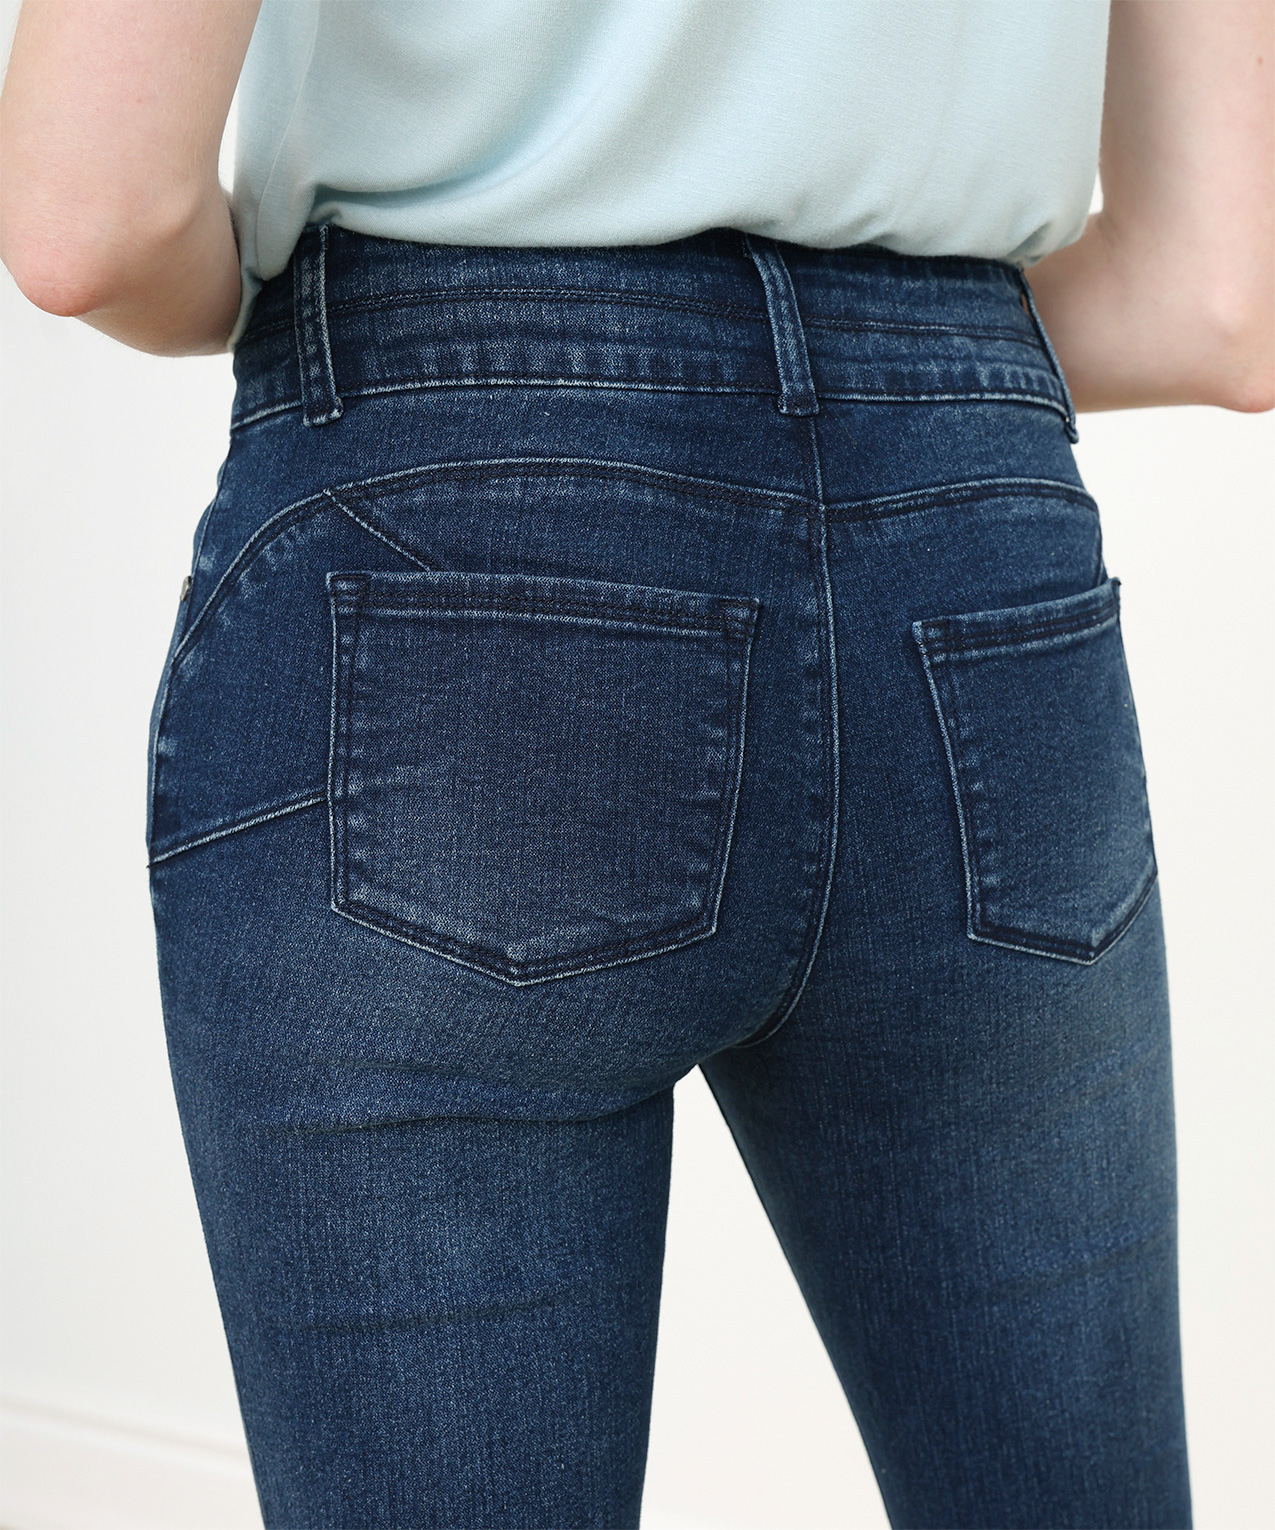 Vintage Wash Bootcut Butt Lift Jeans by GG Jeans, Cleo